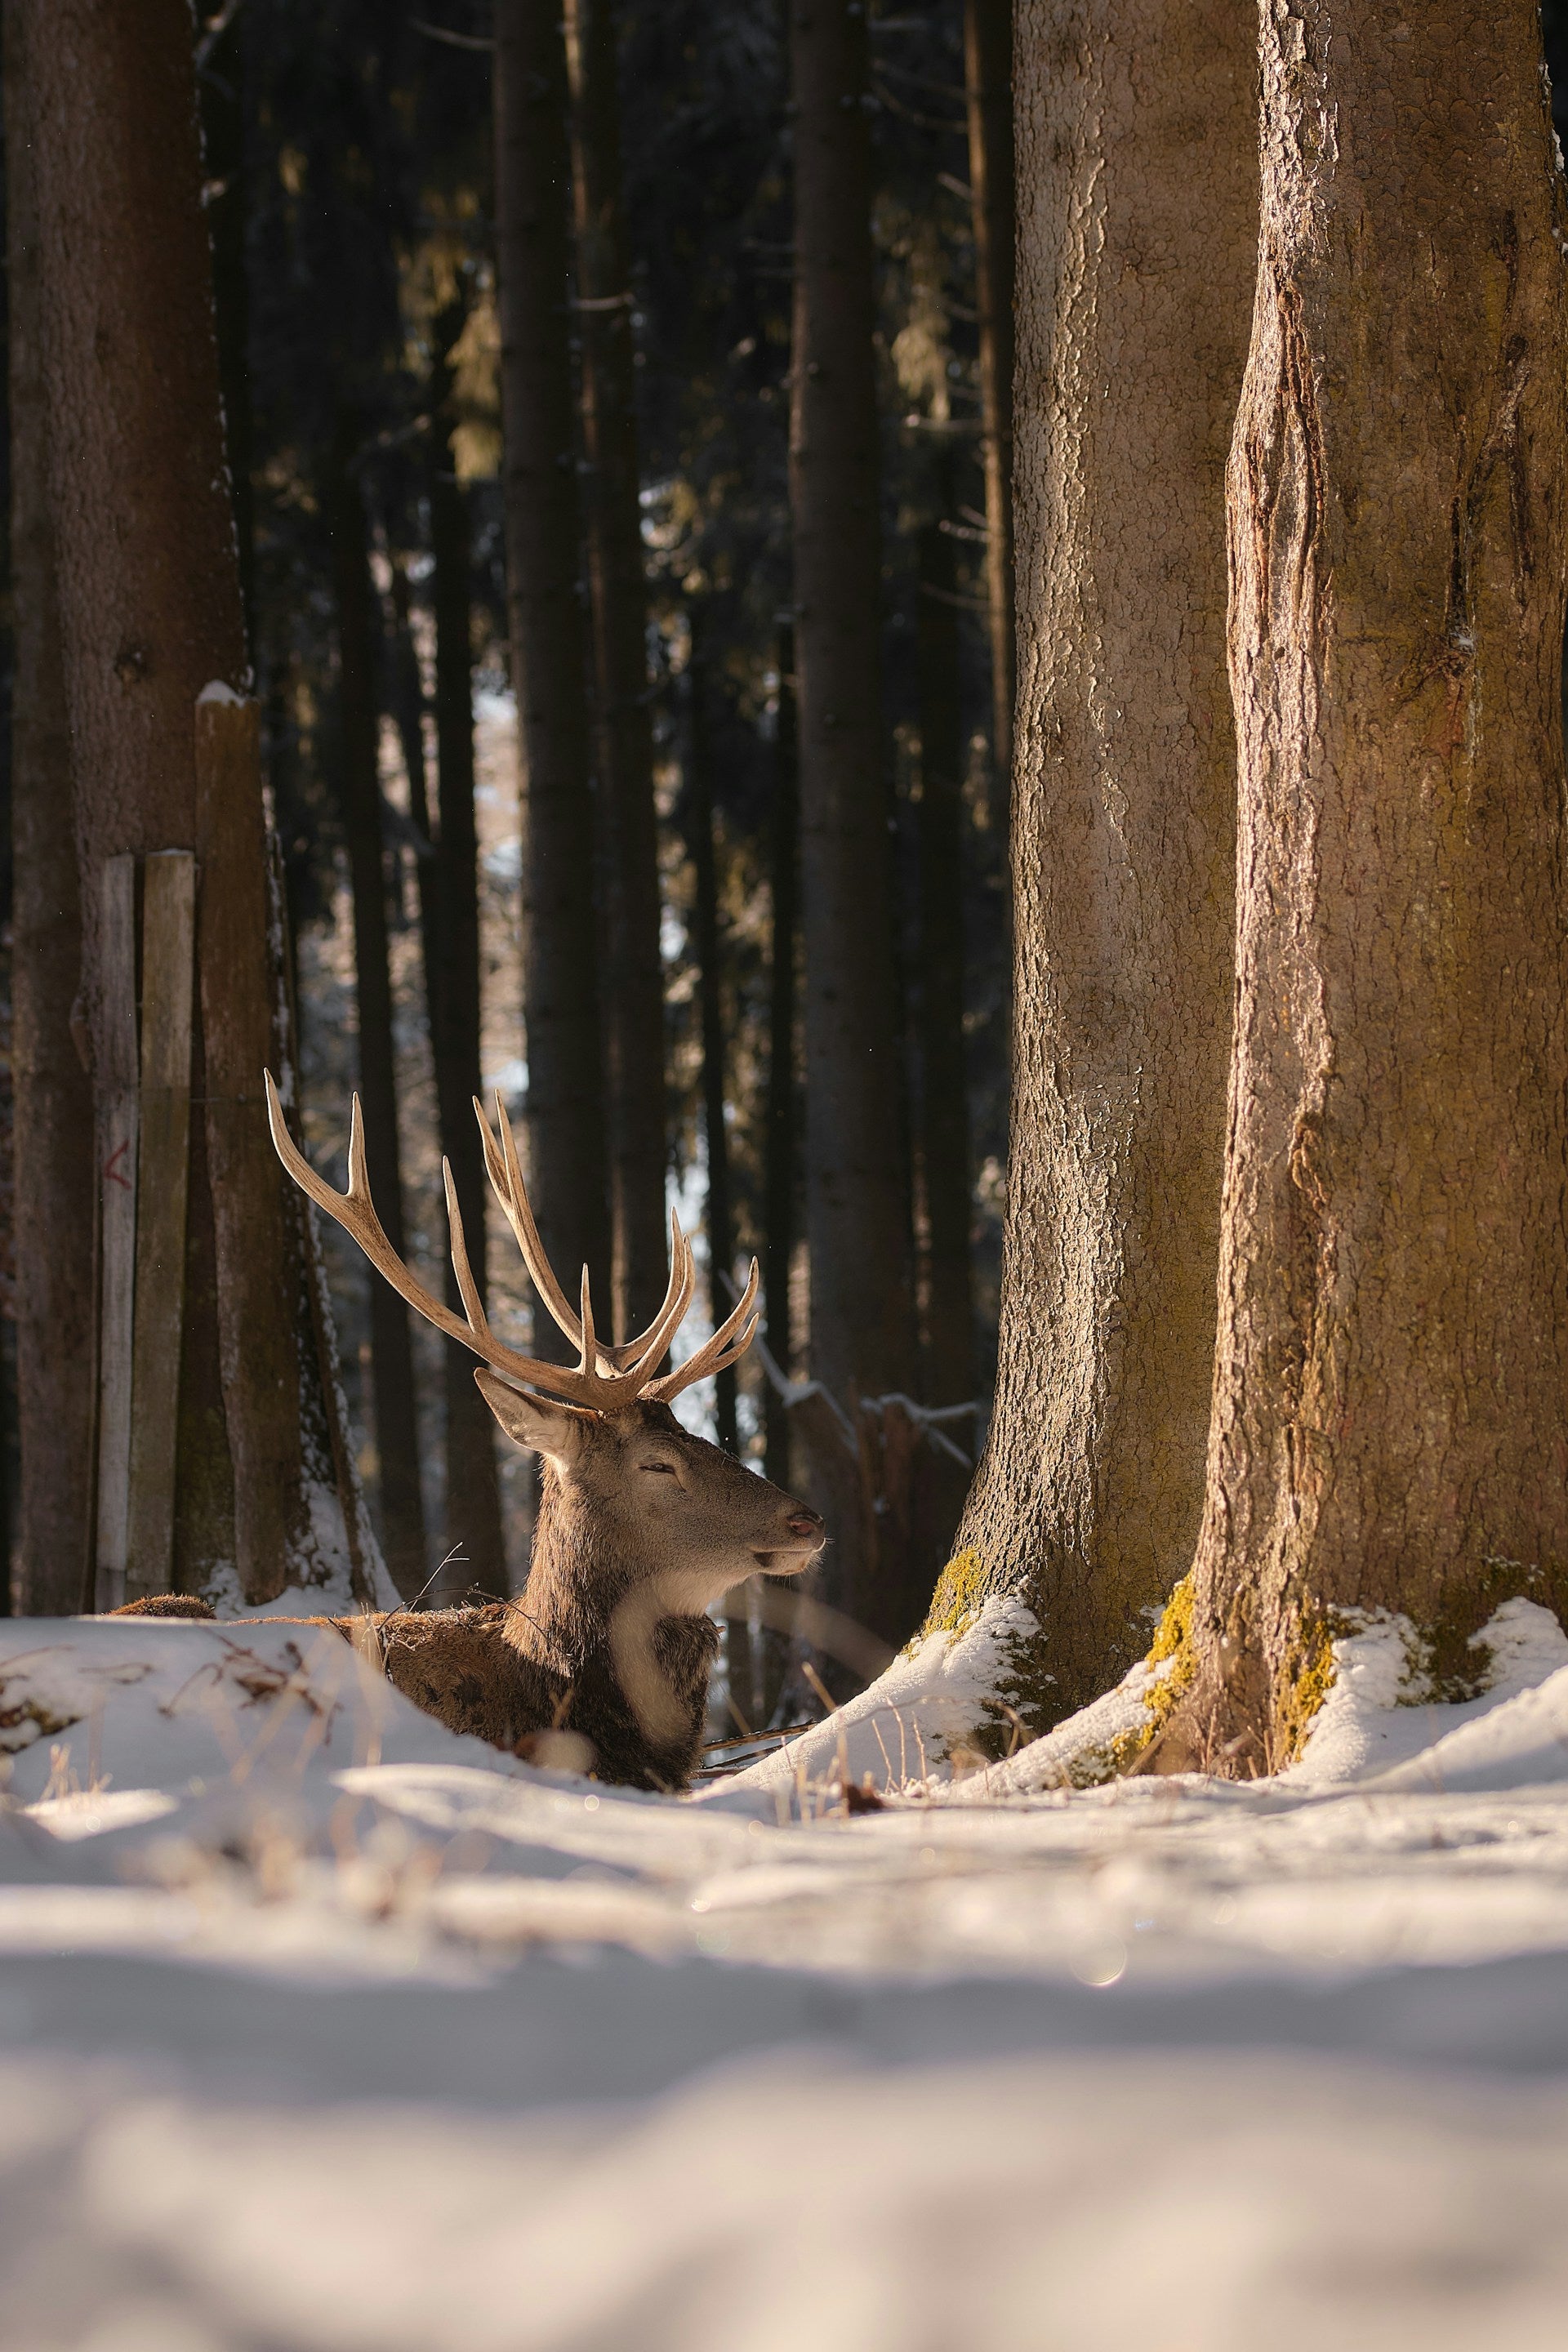 A reindeer laying down in the winter snow by a group of trees